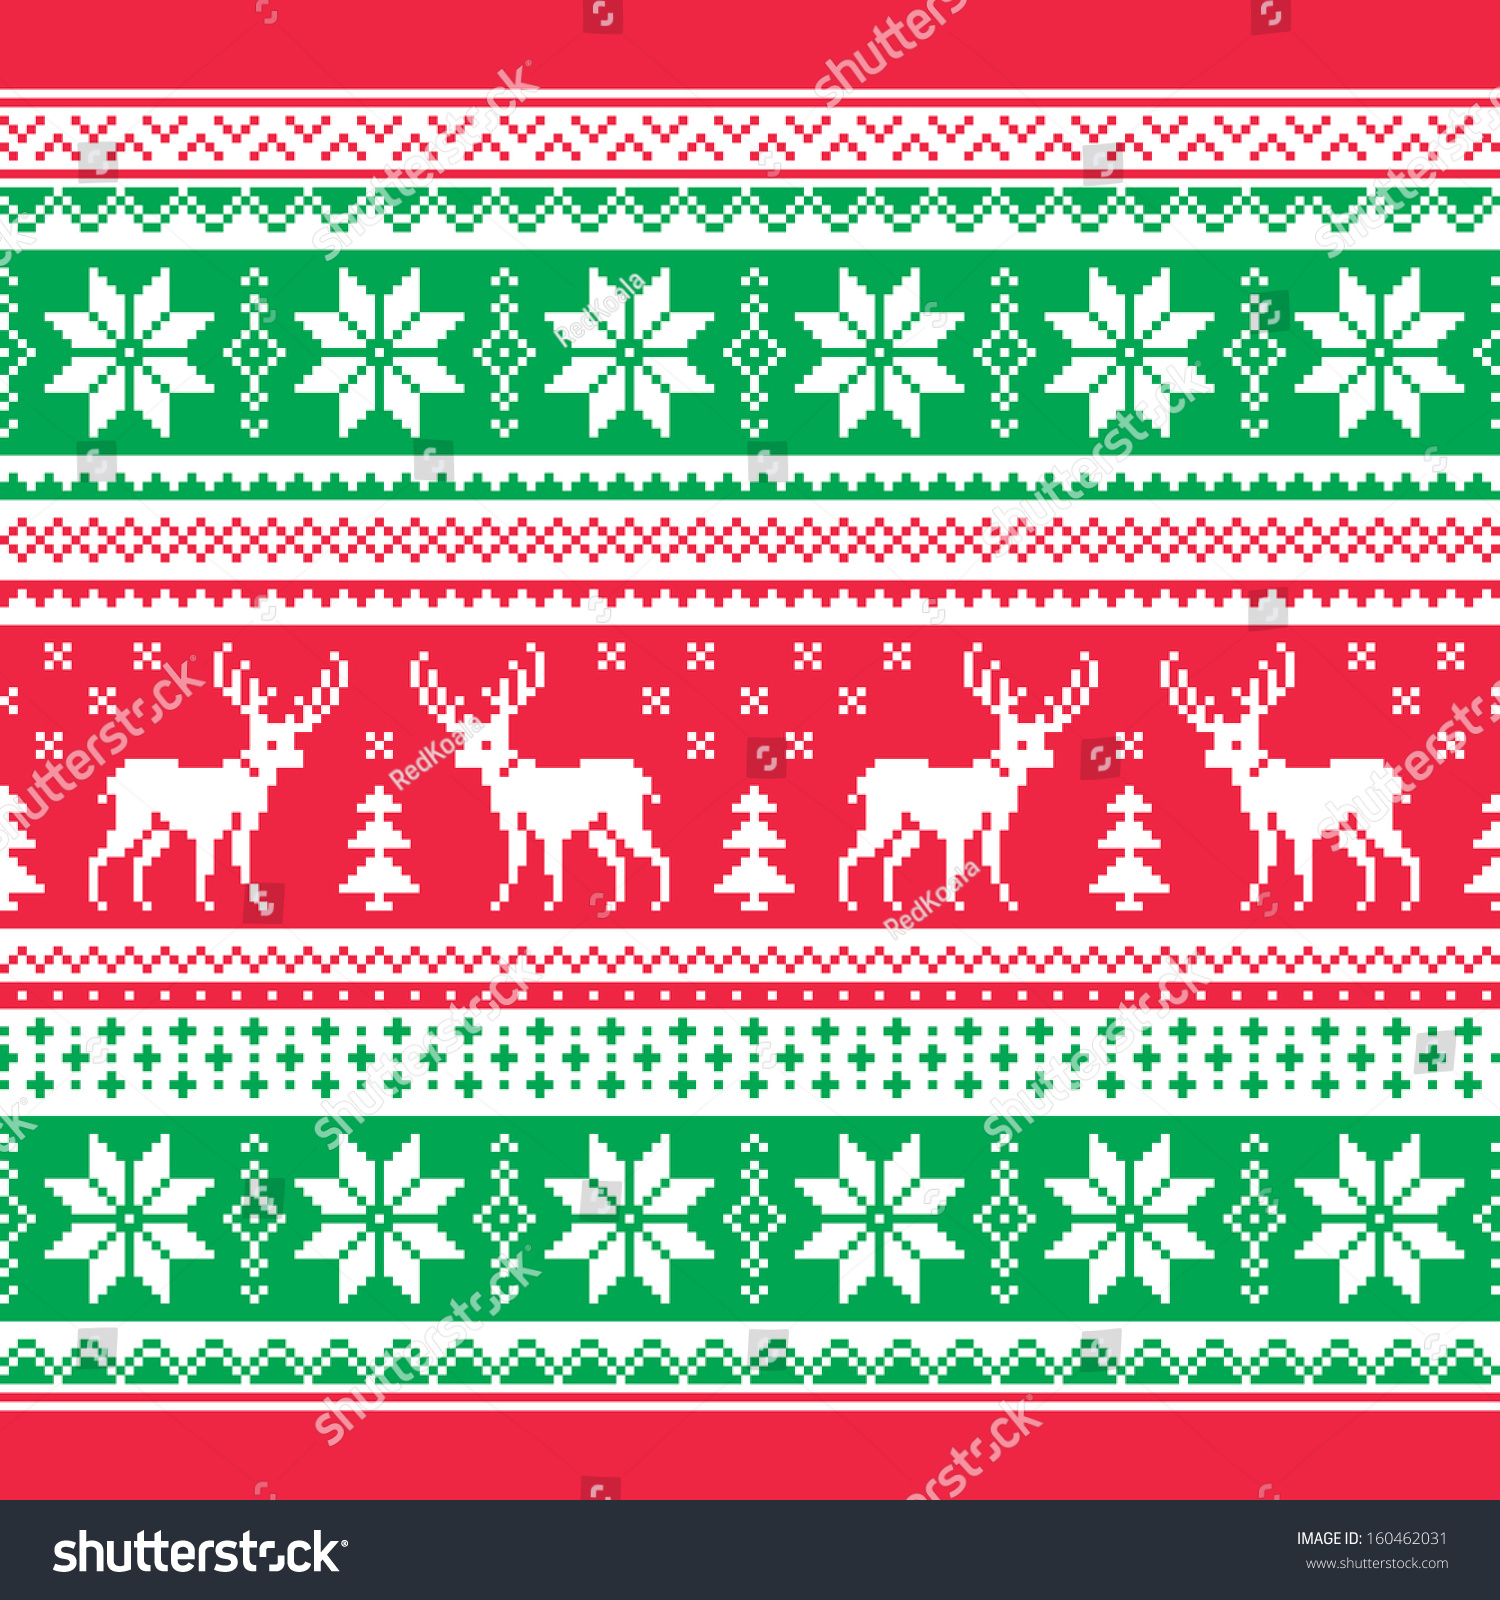 christmas patterns clipart - photo #18